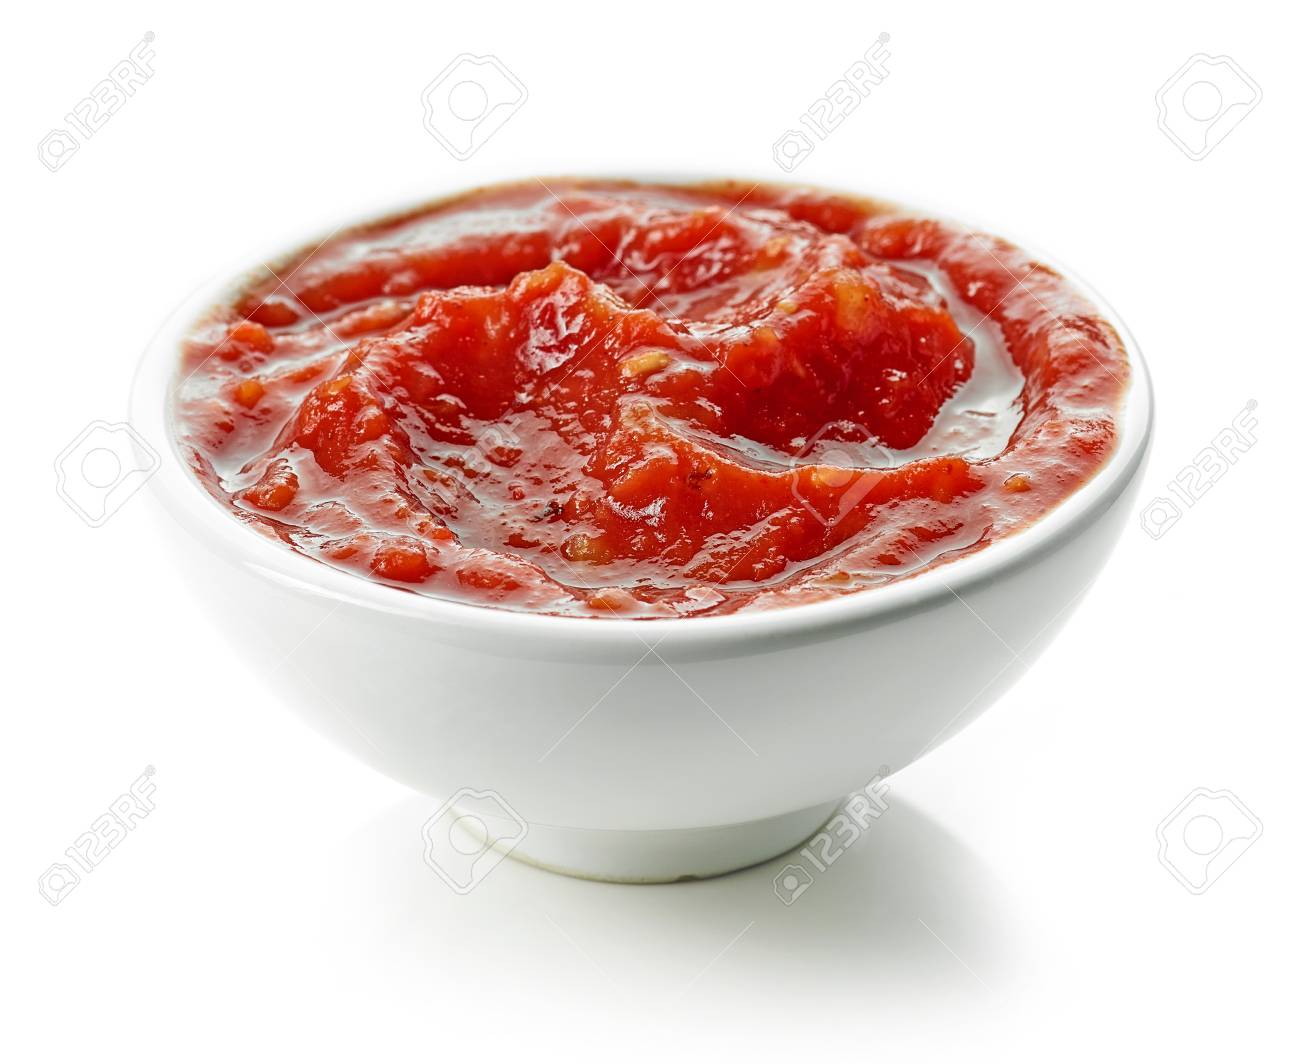 Bowl Of Mexican Salsa Sauce Isolated On White Background Stock